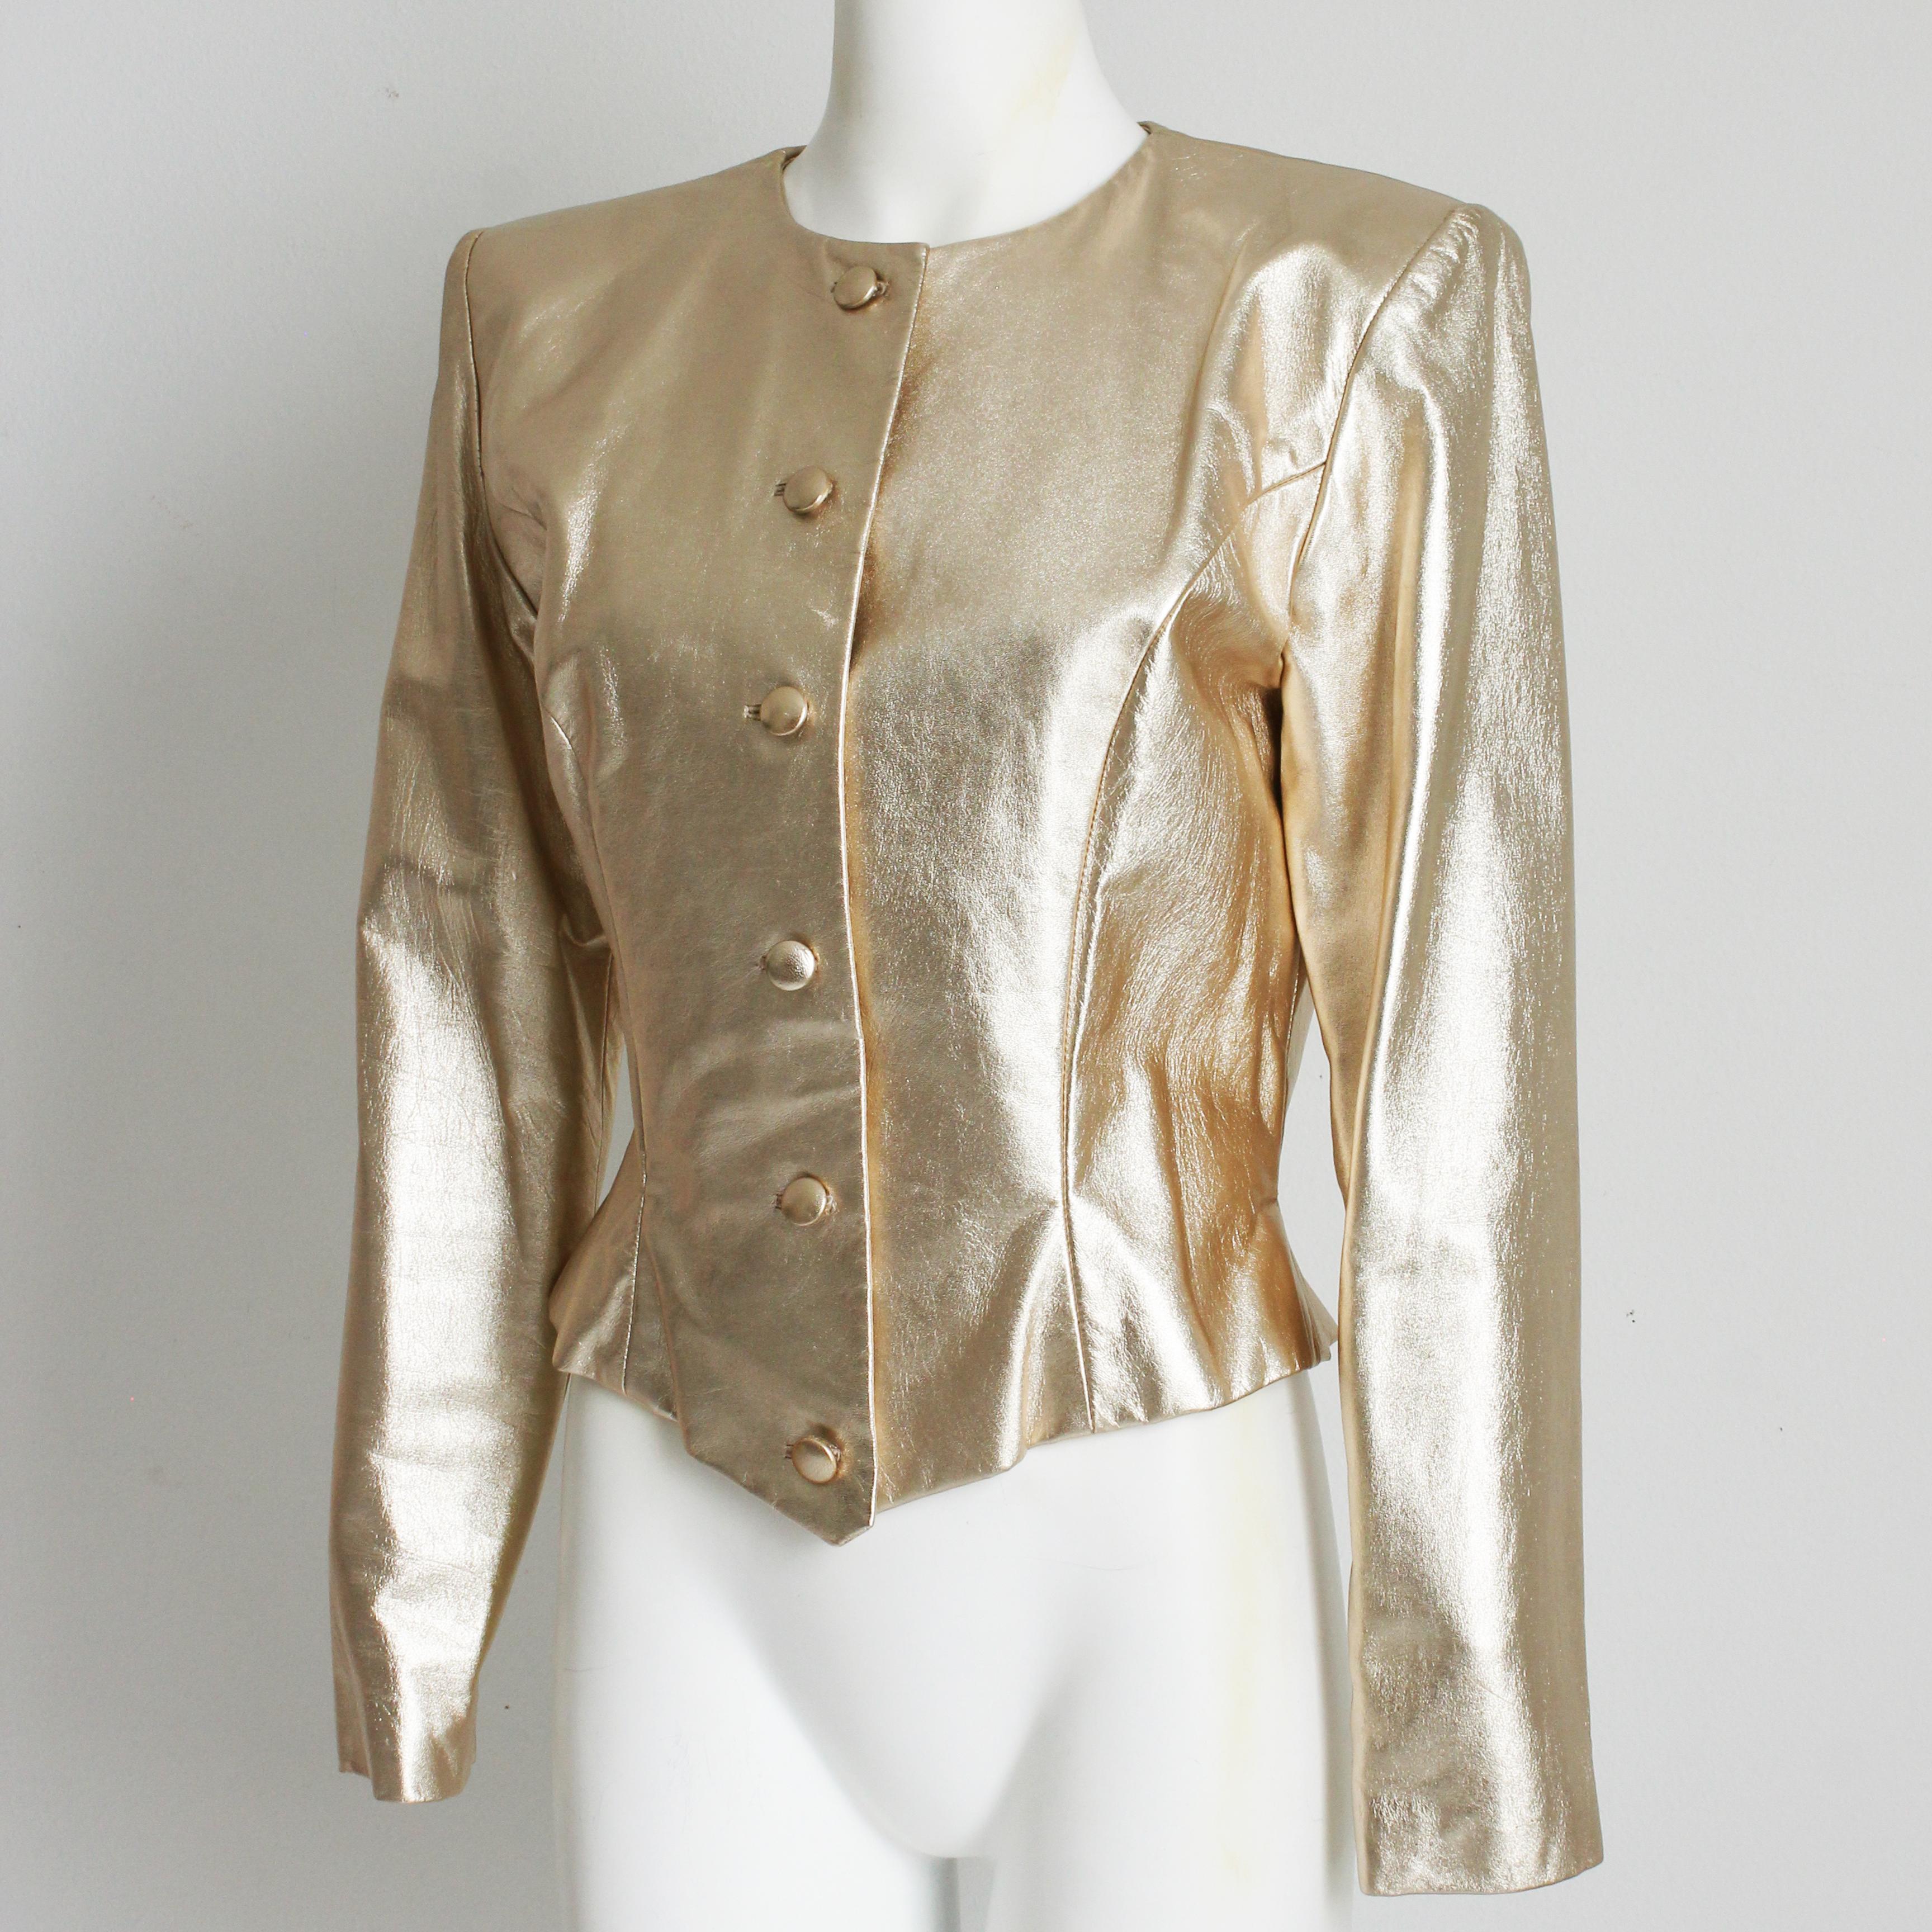 Vicky Tiel Couture Jacket Metallic Gold Leather Formal Evening Vintage Size 42 For Sale 4